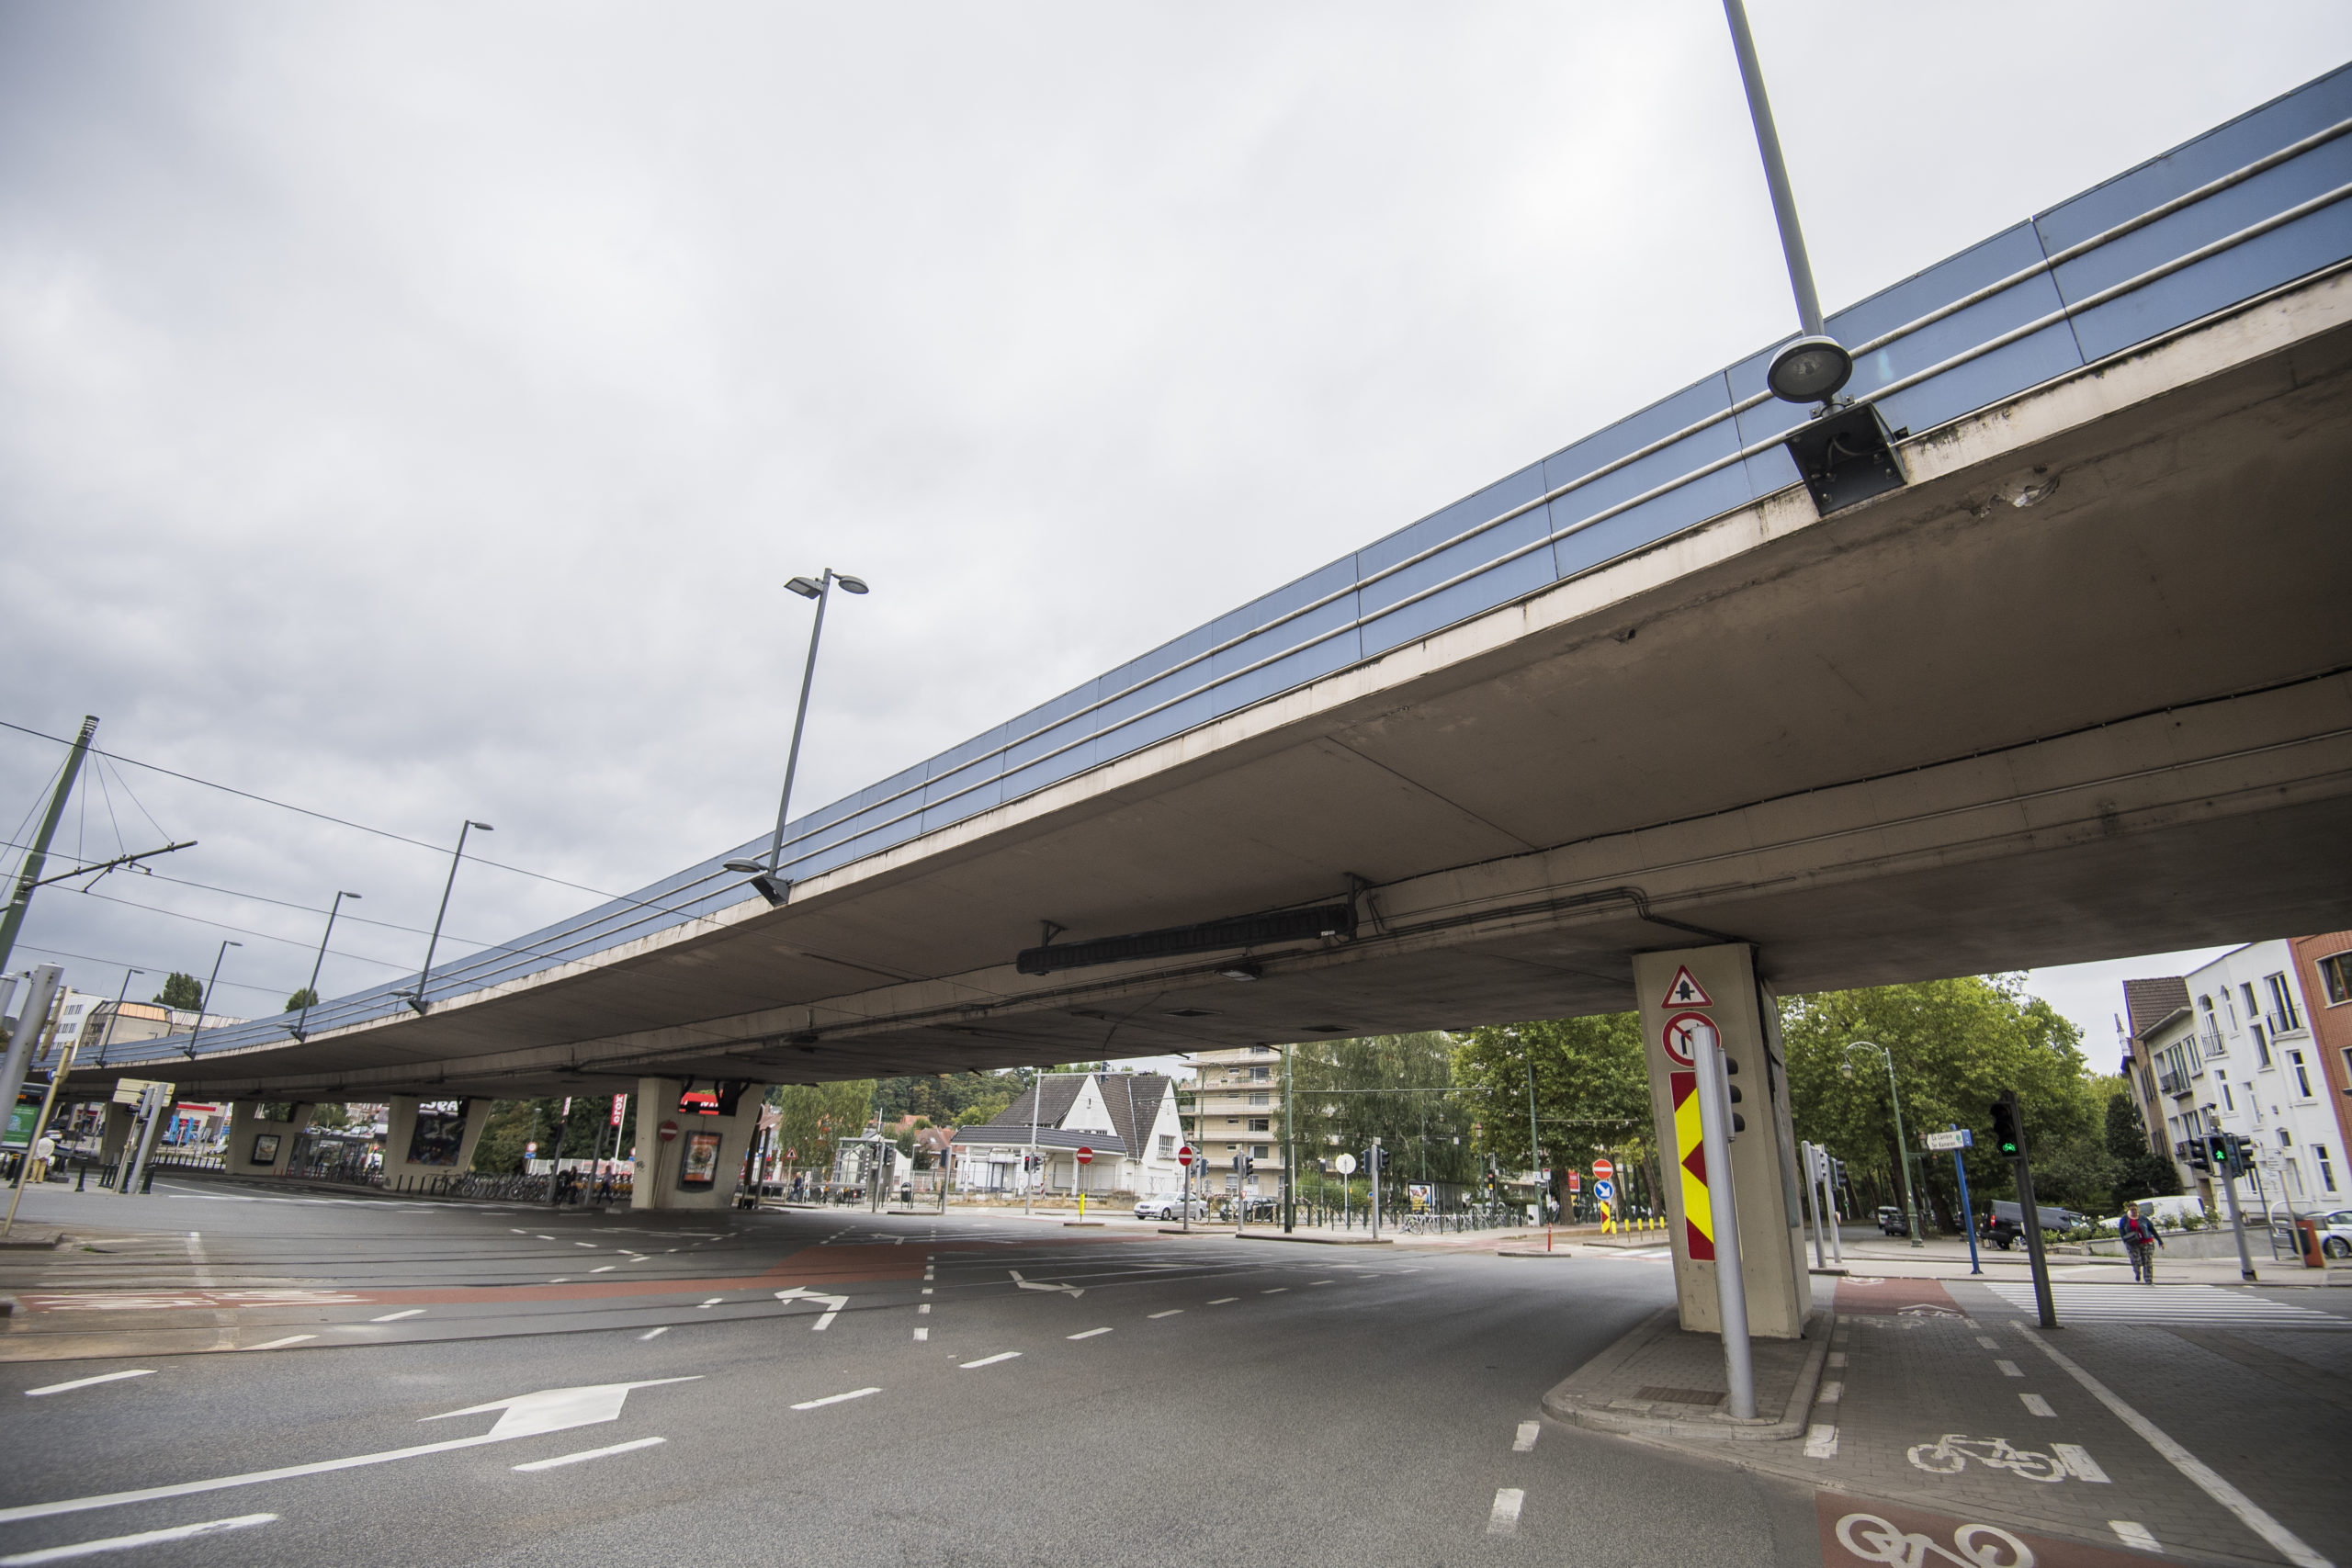 Brussels to knock down Herrmann-Debroux viaduct